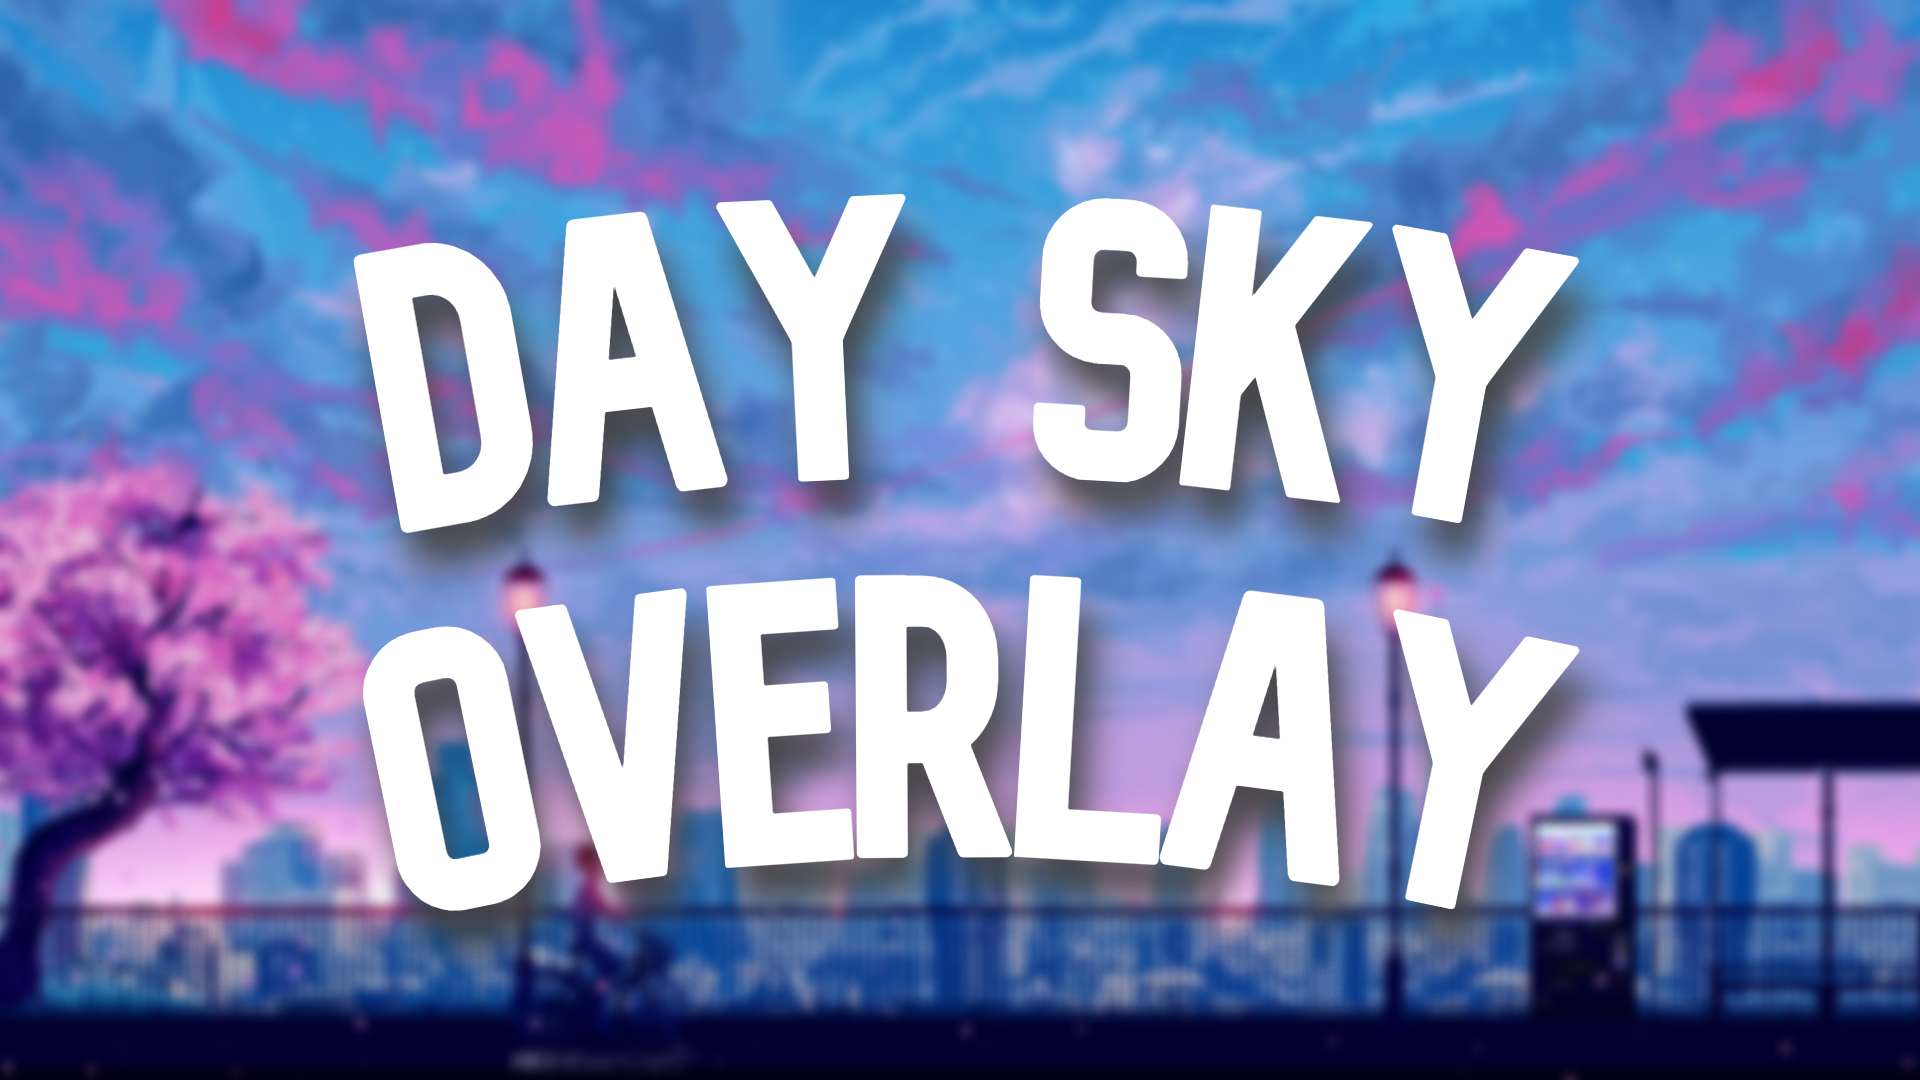 Day Sky Overlay #11 16 by rh56 on PvPRP